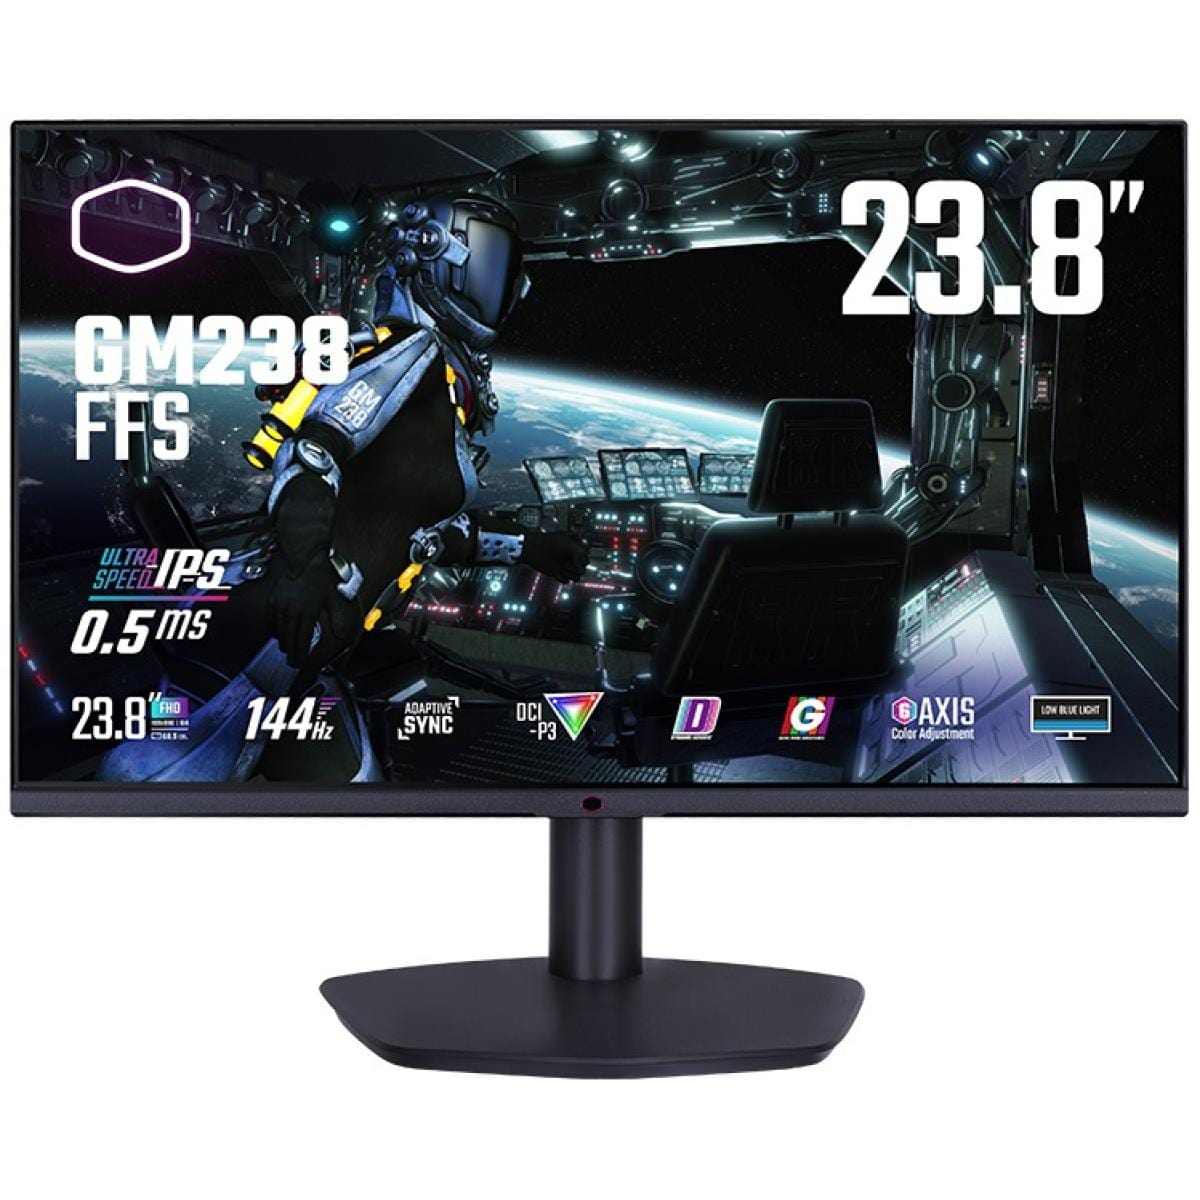 COOLER MASTER Computer Monitors Cooler Master (GM238-FFS) 24" FHD Flat Gaming Monitor, Ultra-Speed IPS, 144Hz, 0.5ms, HDR10, DCI-P3 90% sRGB 120%, G-Sync Compatible